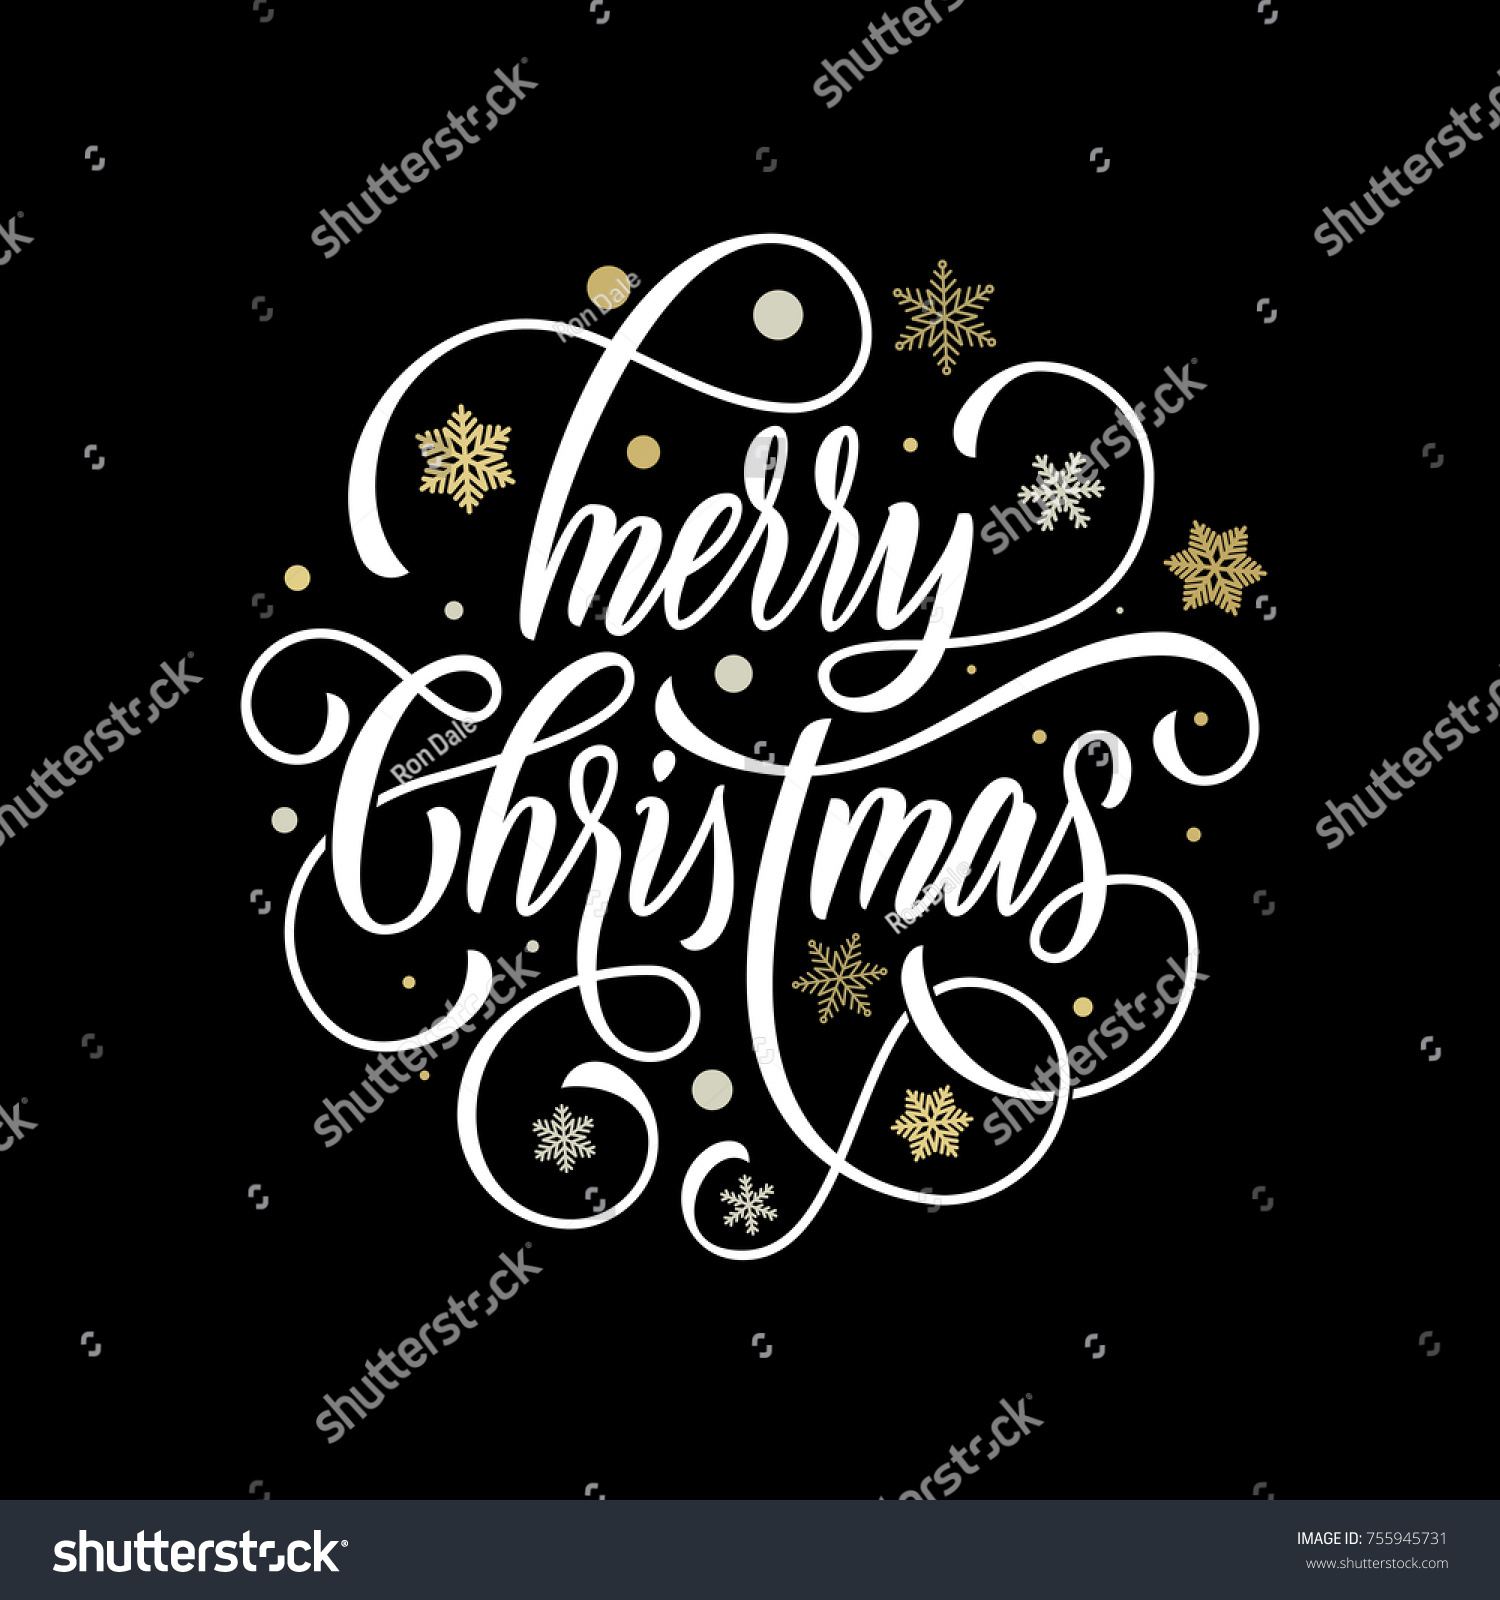 Merry Christmas Hand Drawn Calligraphy Lettering Stock Vector (Royalty ...